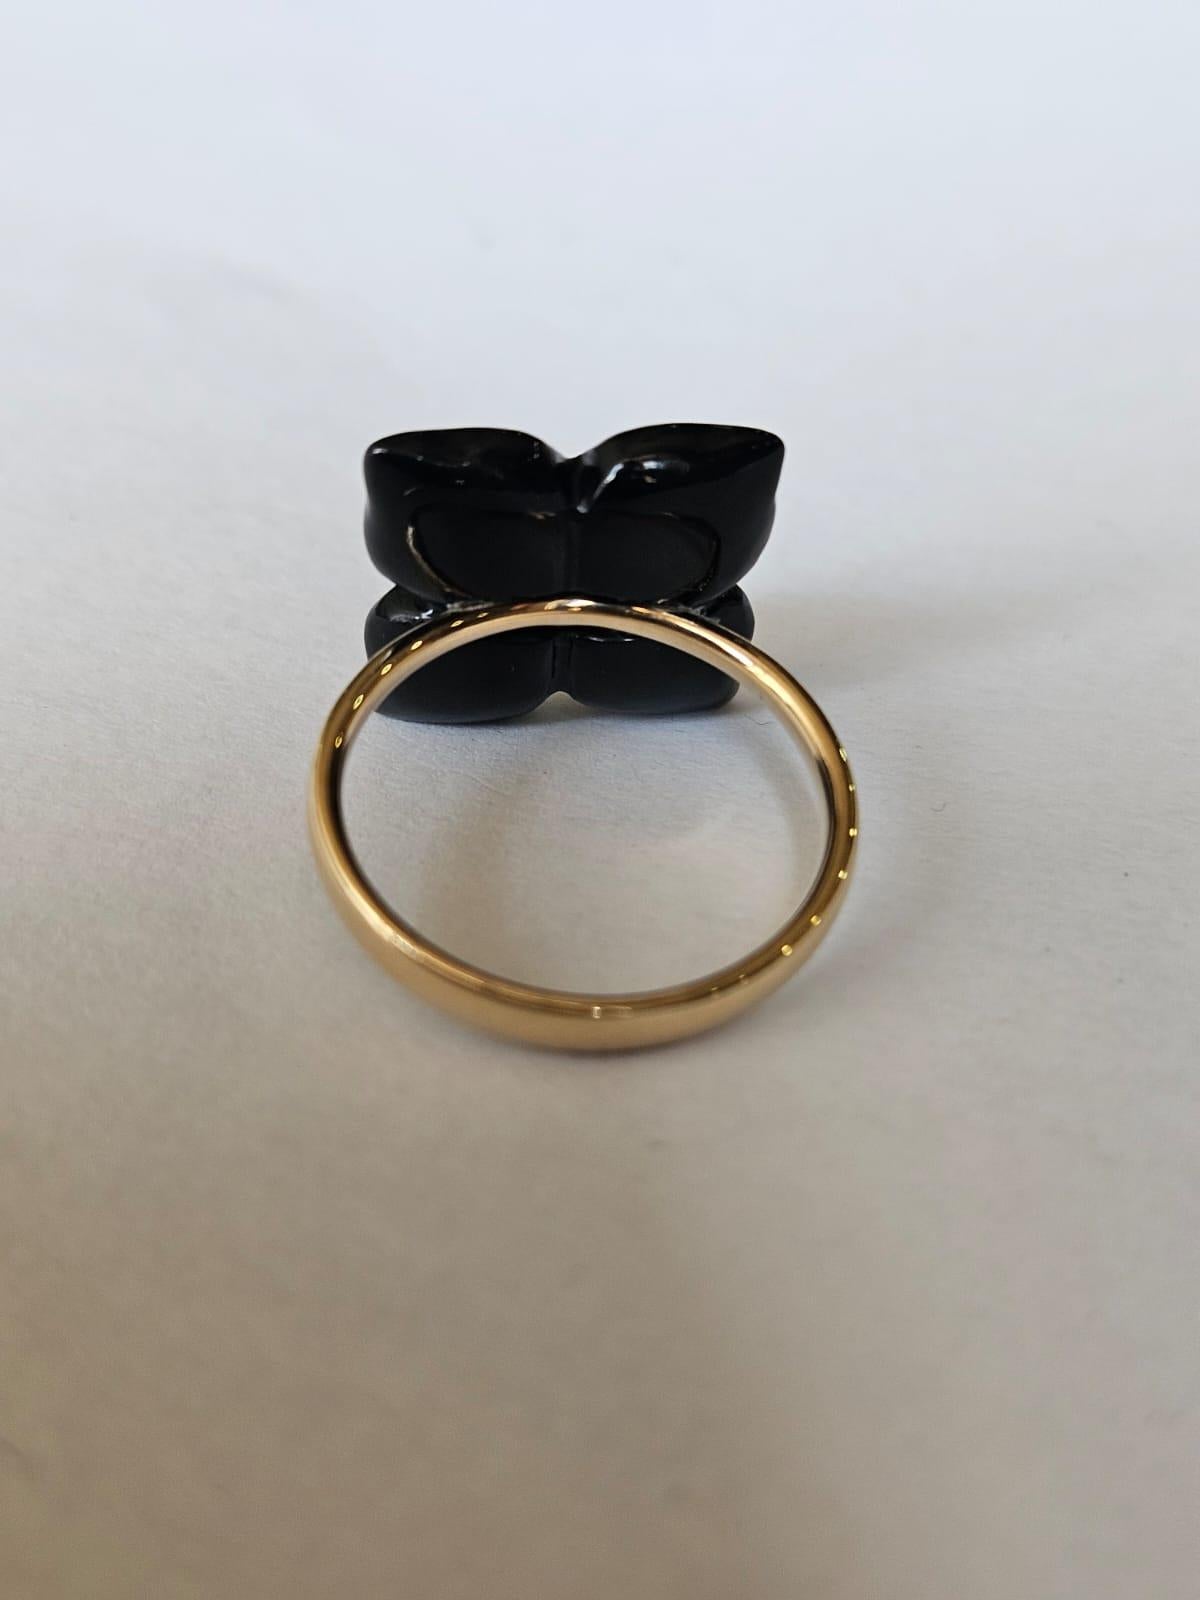 Art Deco Set in 18K Gold, natural Zambian Emerald, Black Onyx & Diamonds Cocktail Ring For Sale